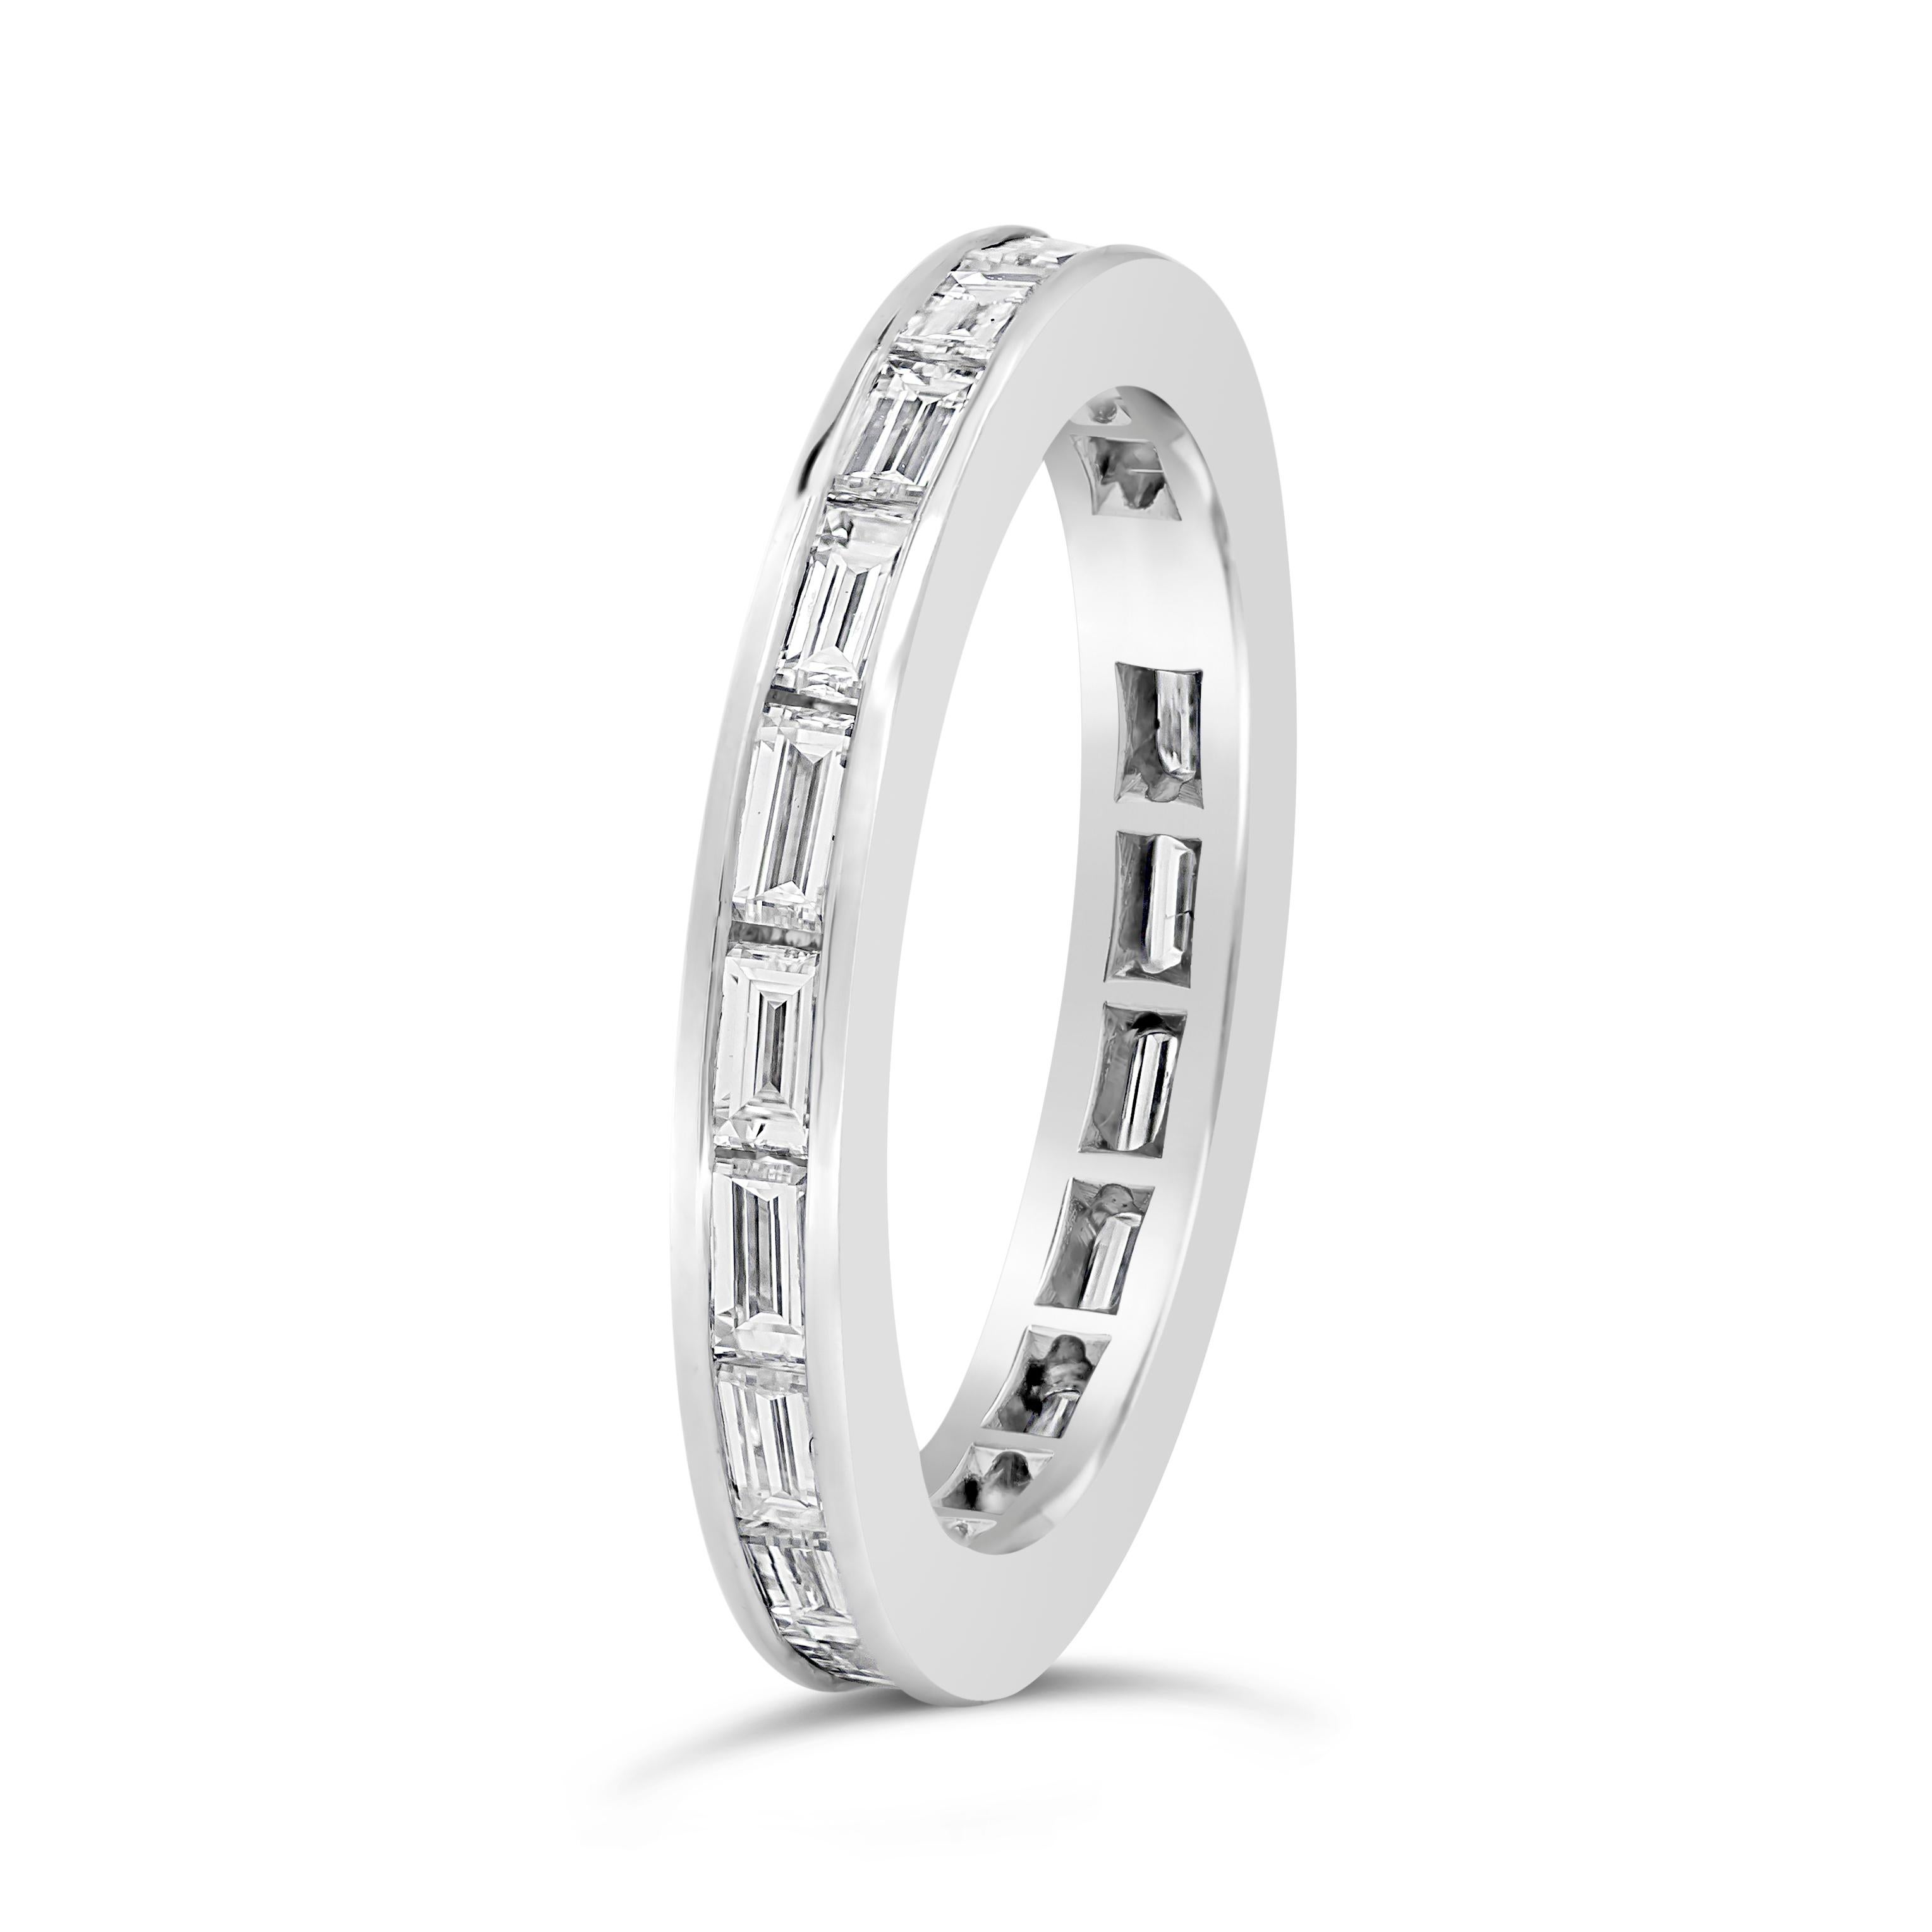 A unique and chic wedding band design showcasing baguette diamonds weighing 0.90 carats total. Elegantly set in platinum. Size 5 US.

